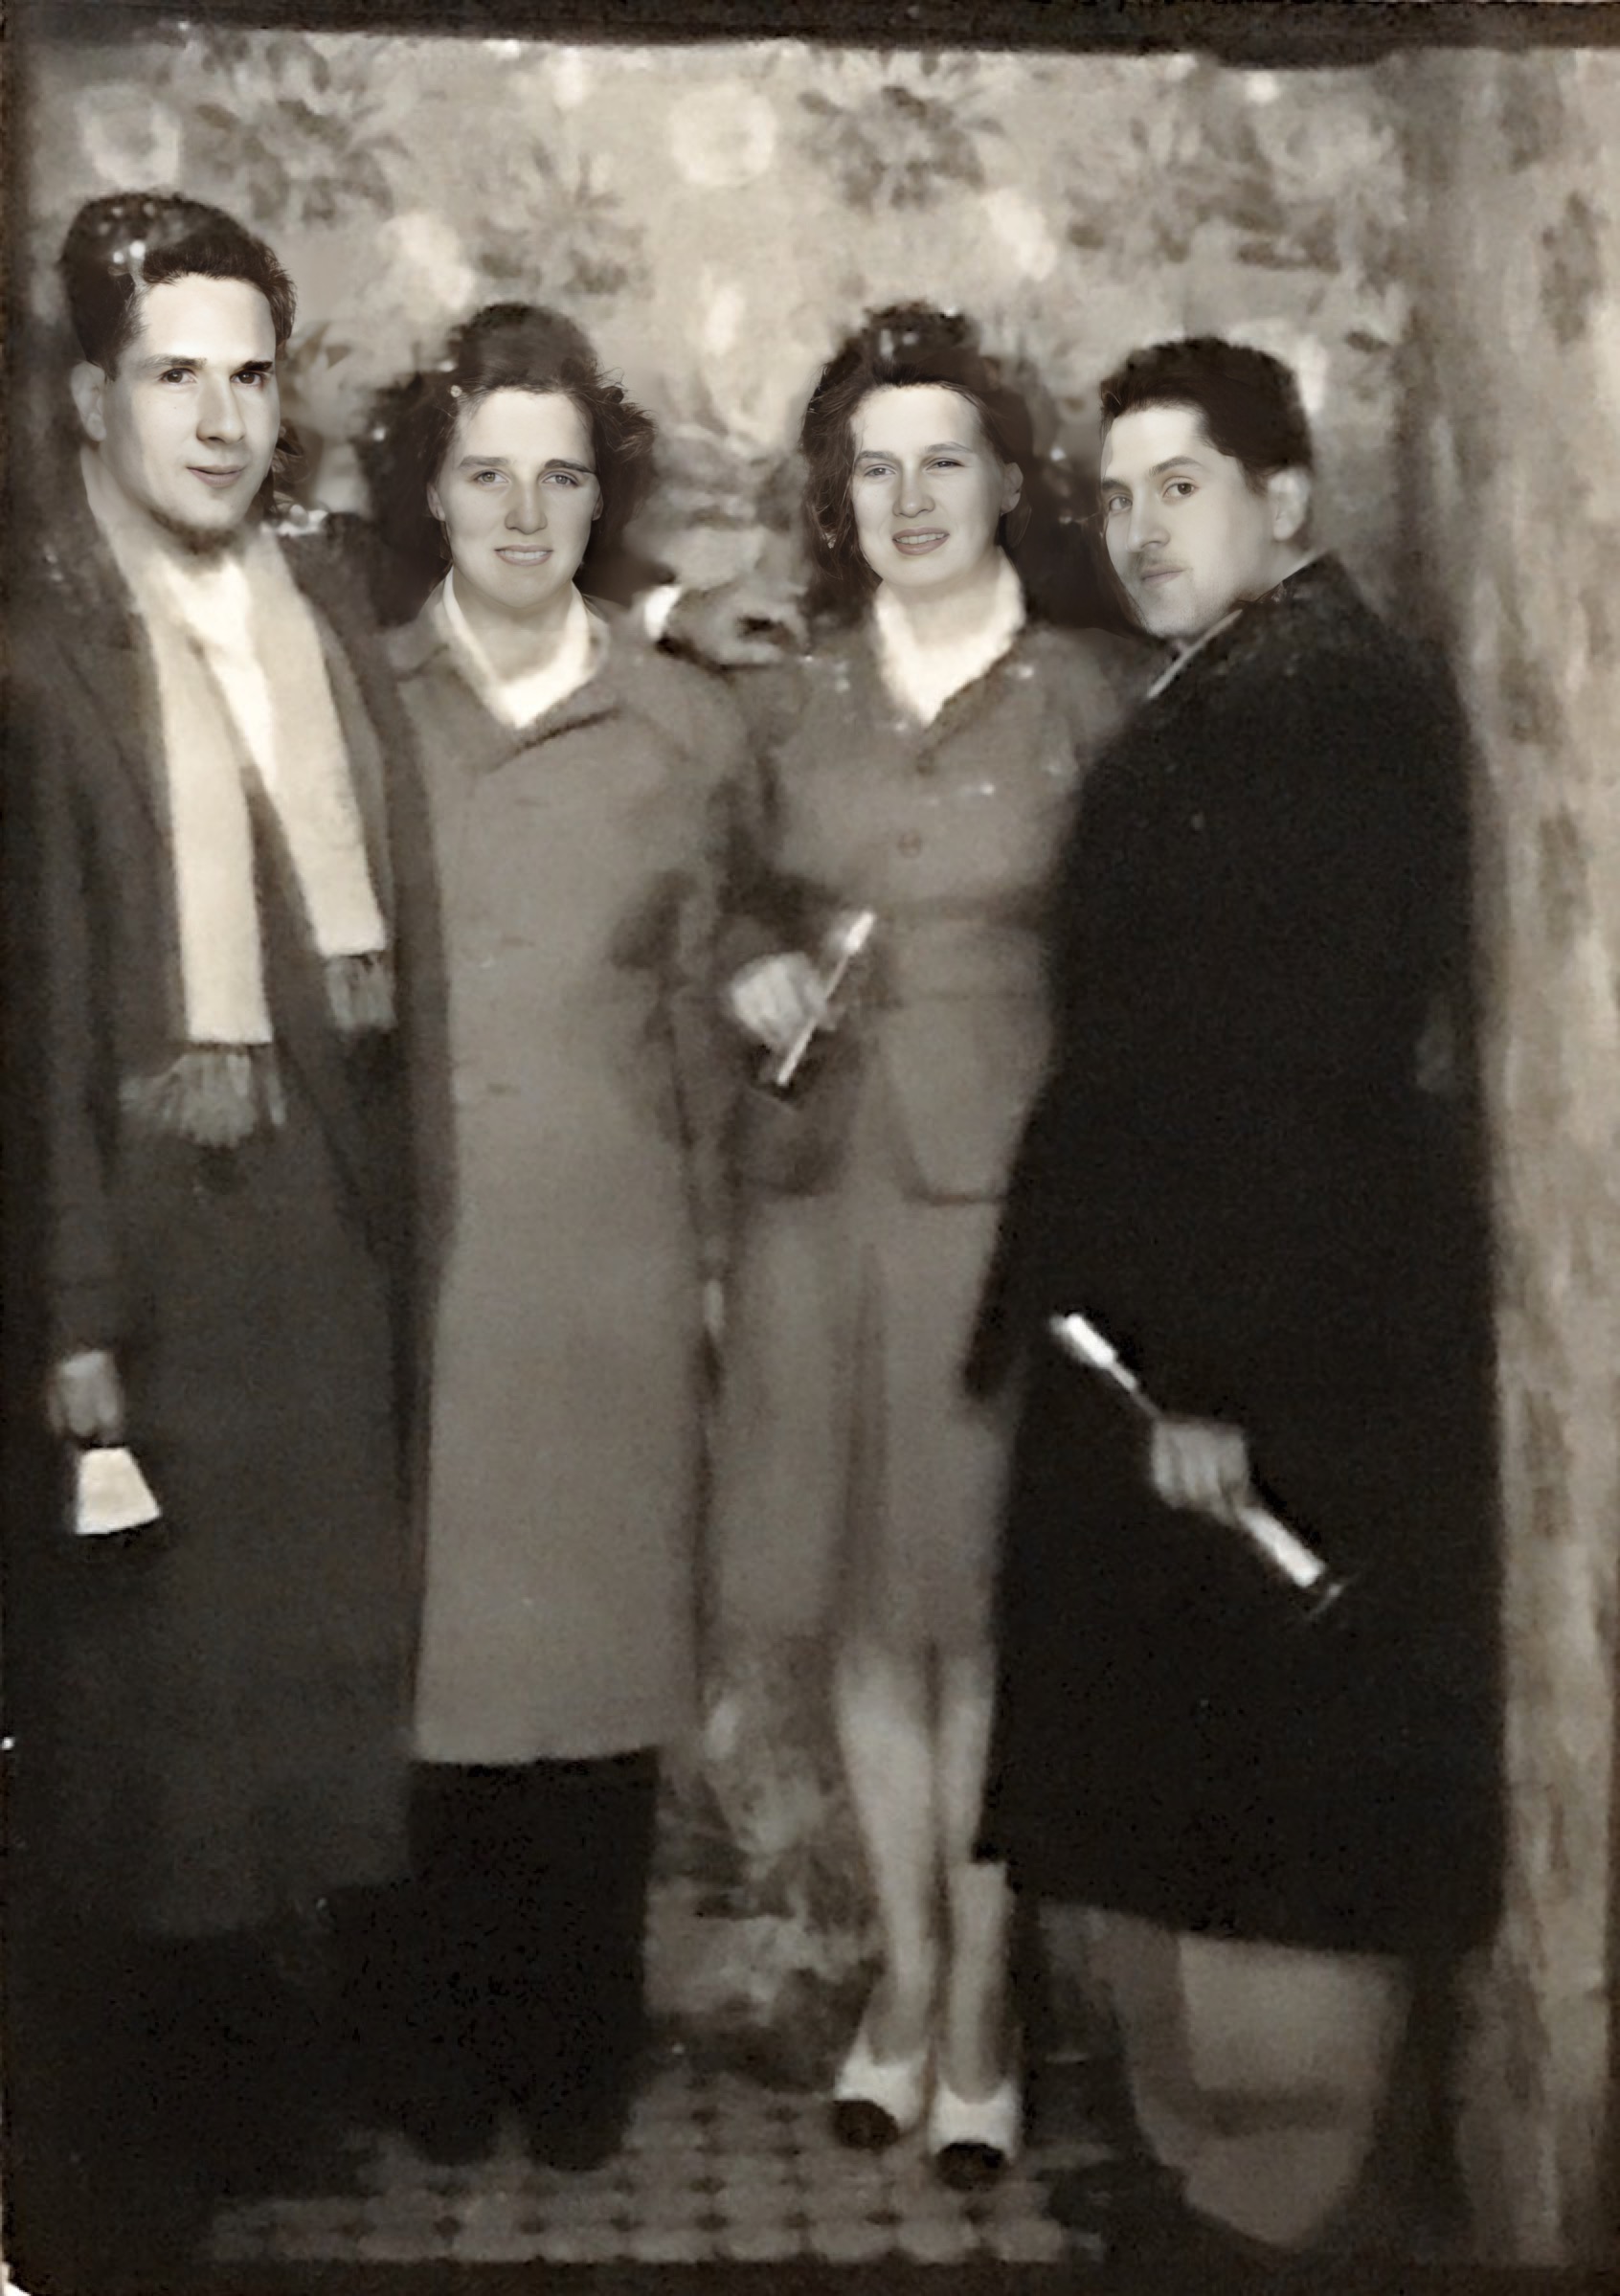 Dad, mom, mom’s sister, dad‘s brother - New Year’s, 1941, San Francisco Bay area, CA